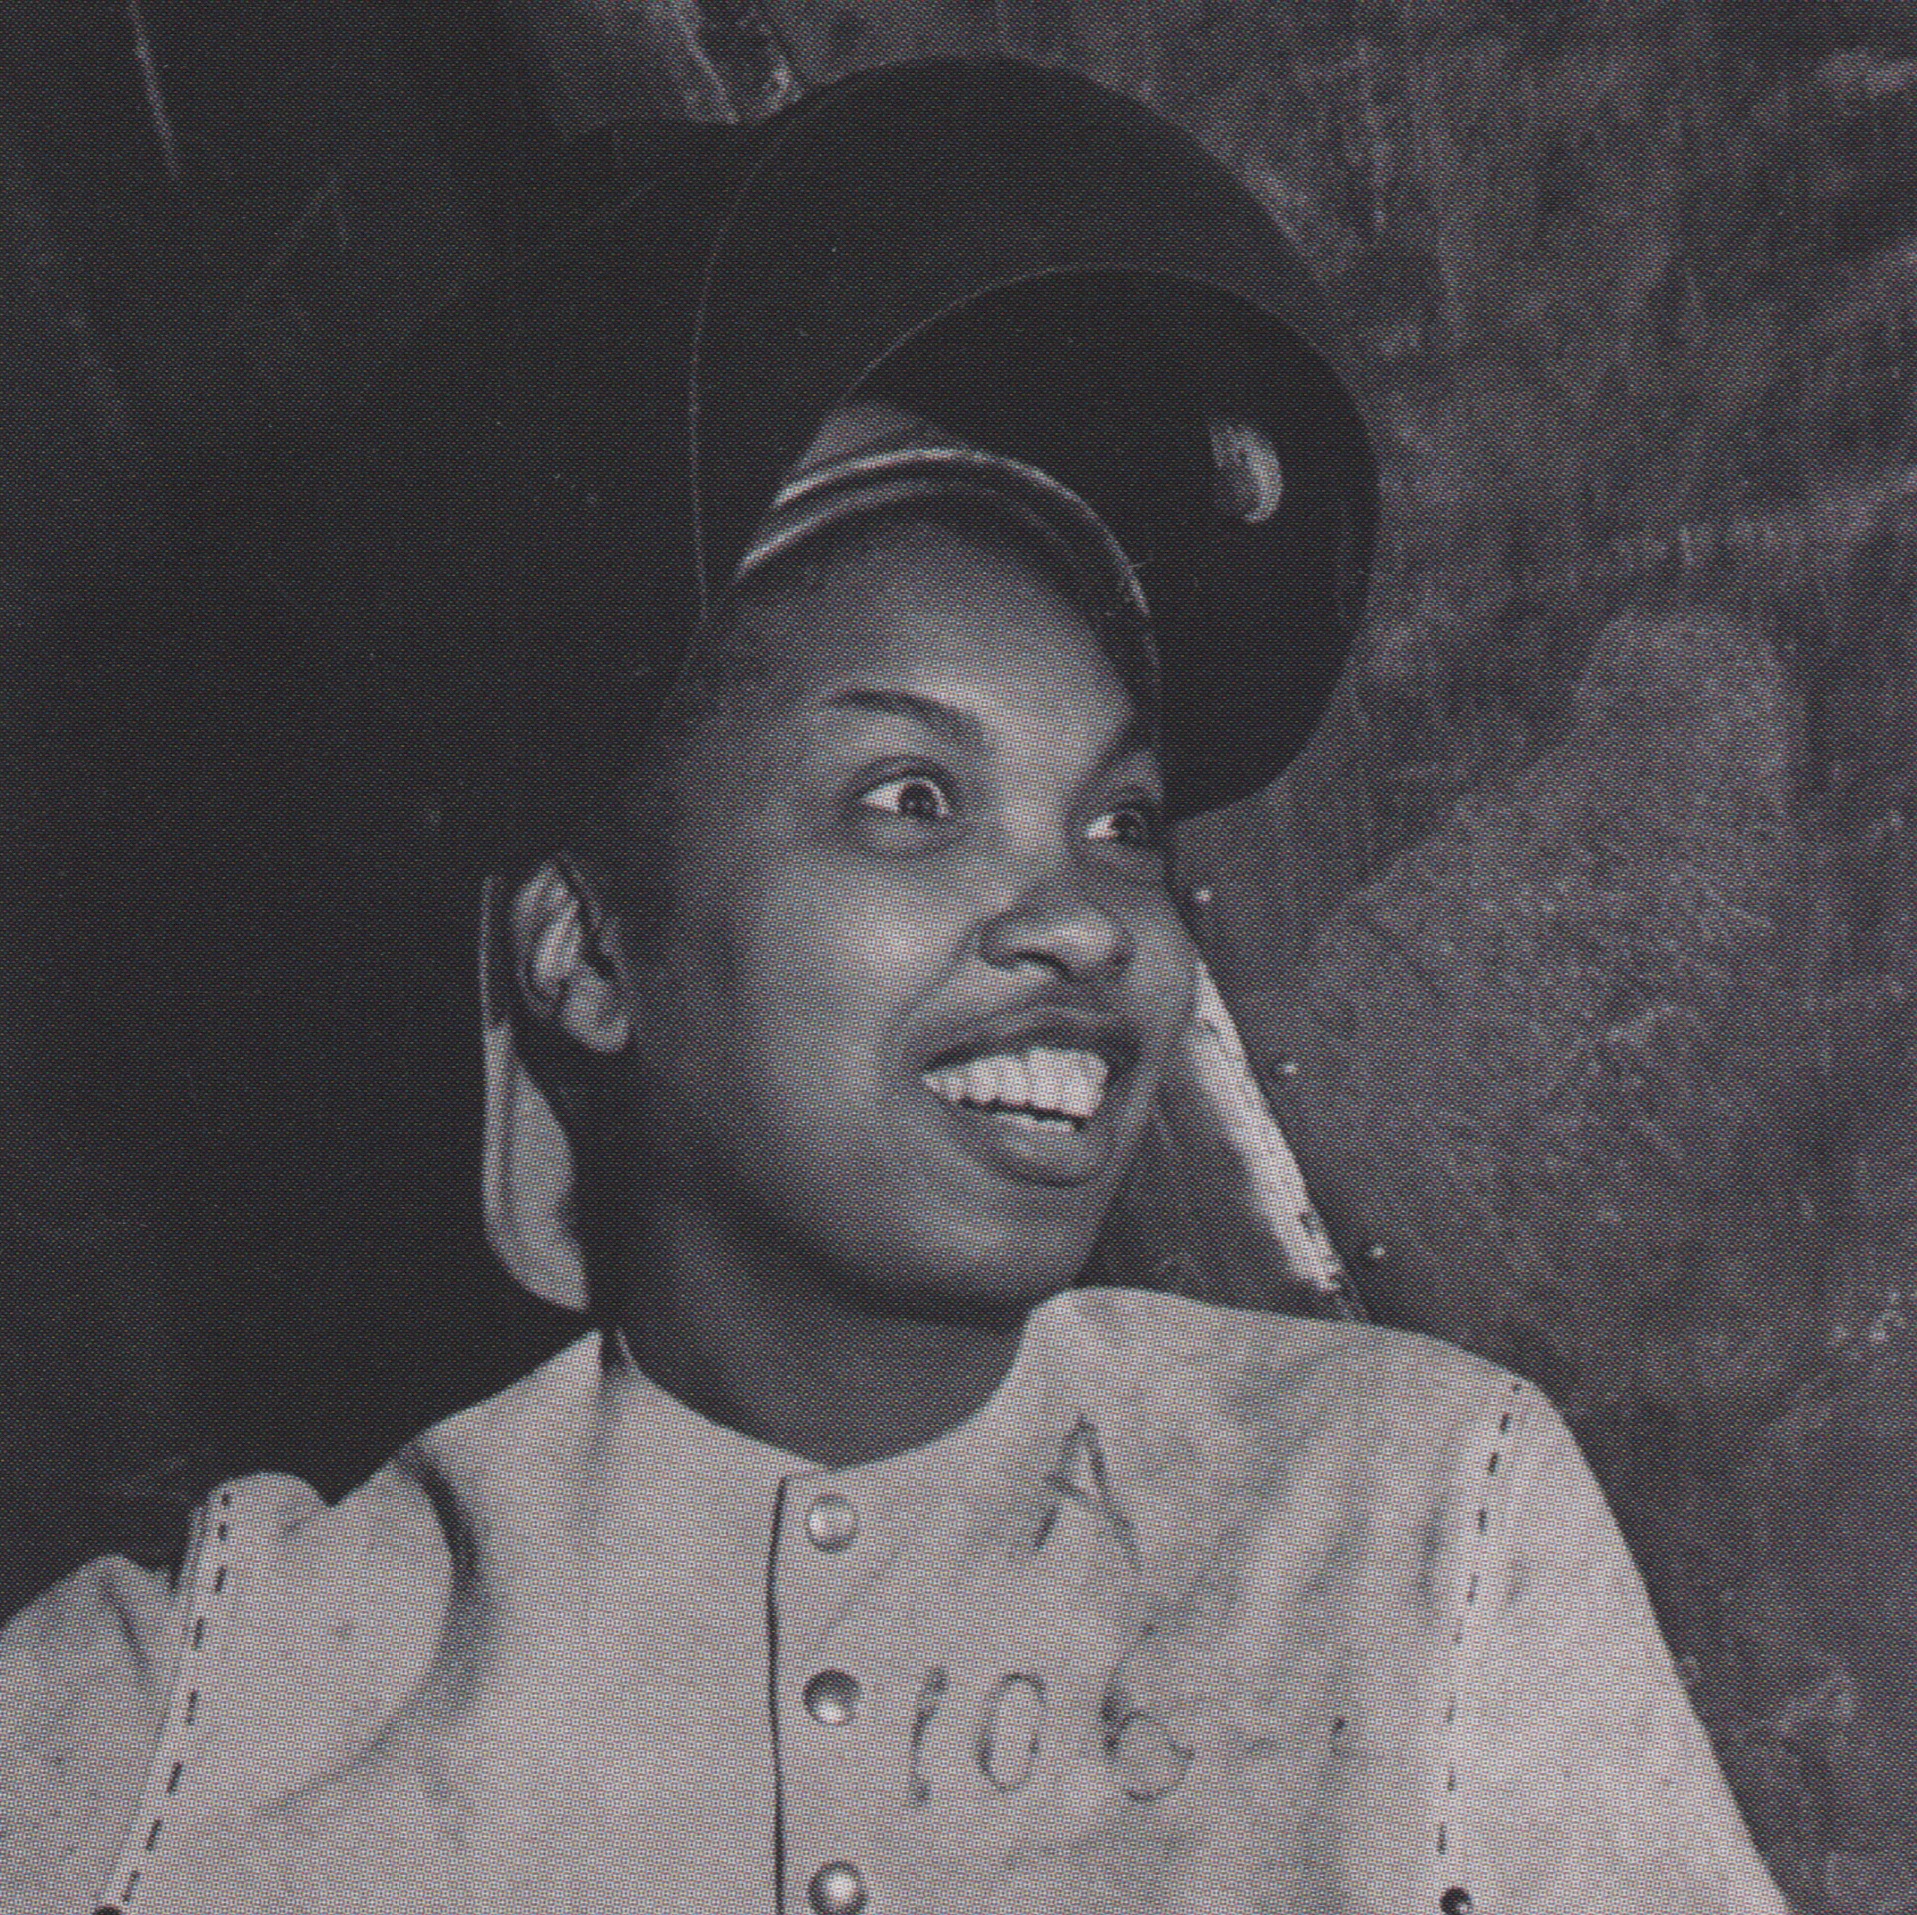 An African-American female wearing a welder's helmet flipped up. She is smiling and looks surprised.